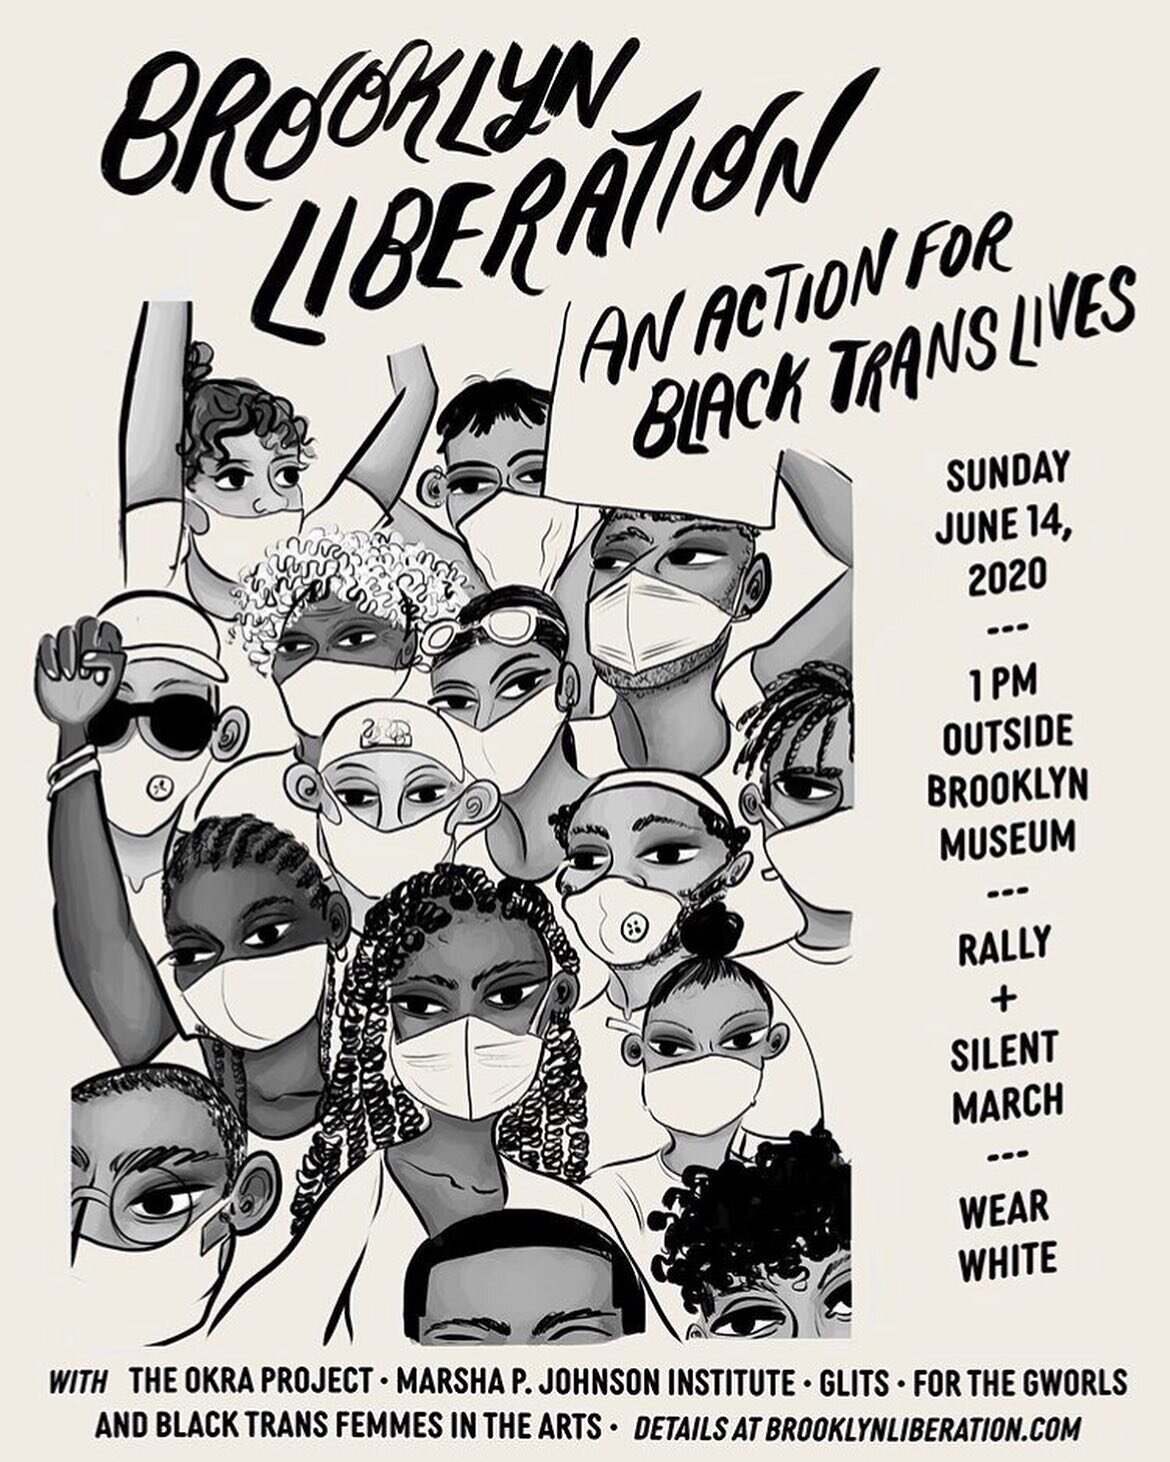 SUNDAY 6/14 at 1pm ! BLACK TRANS LIVES MATTER
.
Event by @theokraproject @mpjinstitute @glits_inc @btfacollective .
Poster artwork by @brohammed .
Screenshots of a caption by @raquel_willis